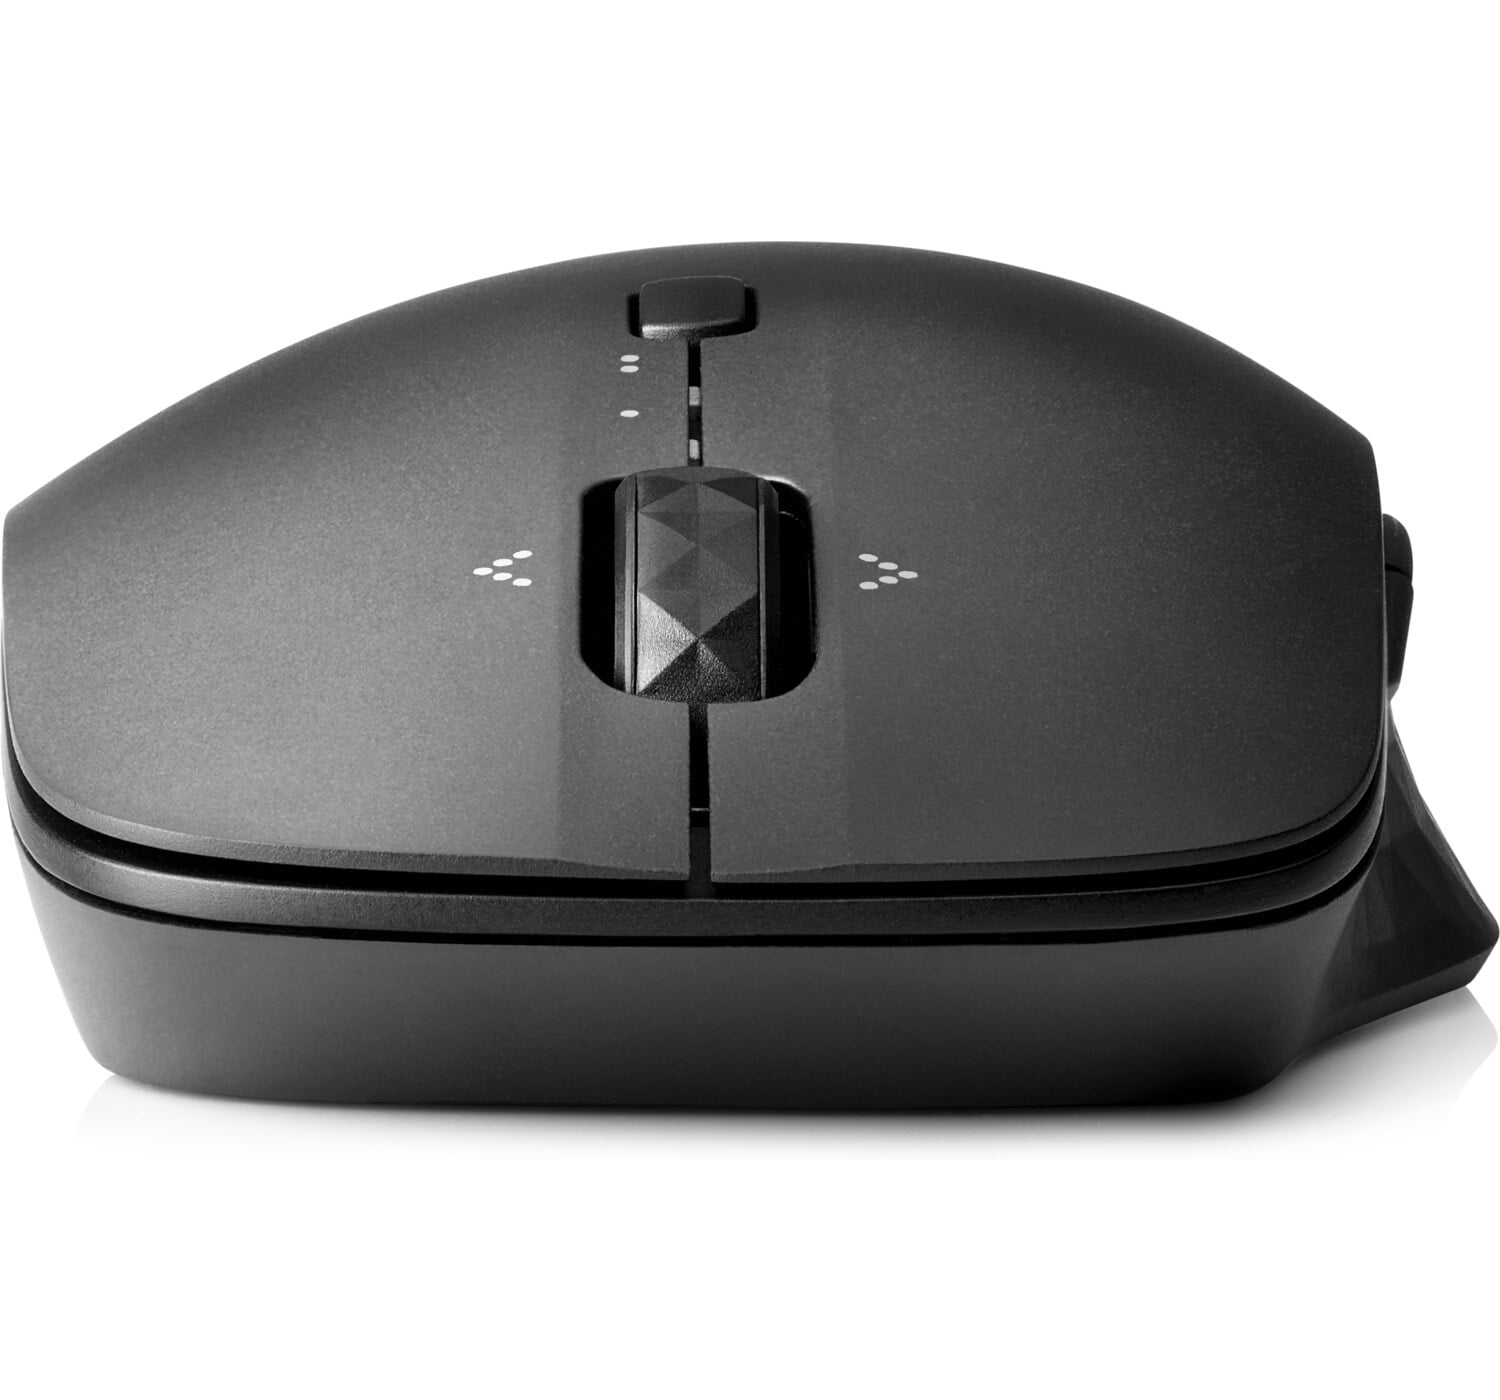 HP Bluetooth Travel (6SP30UT#ABA) Mouse